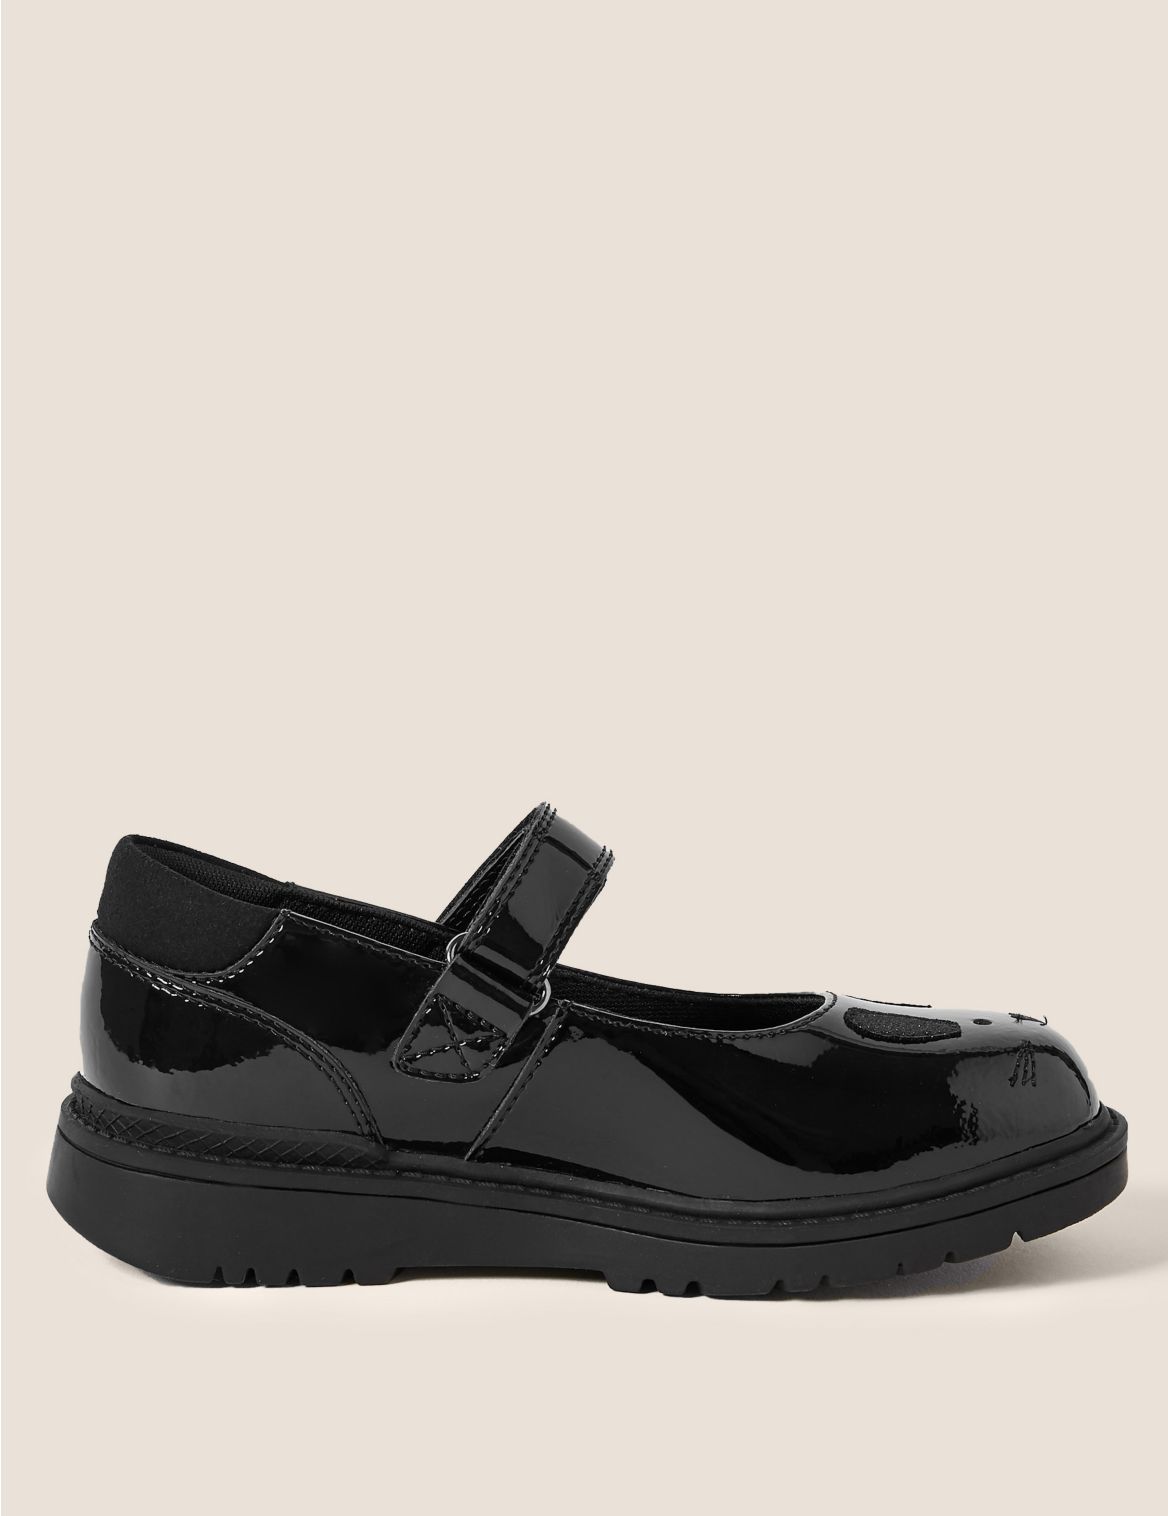 Kids’ Leather School Shoes (8 Small - 1 Large) black